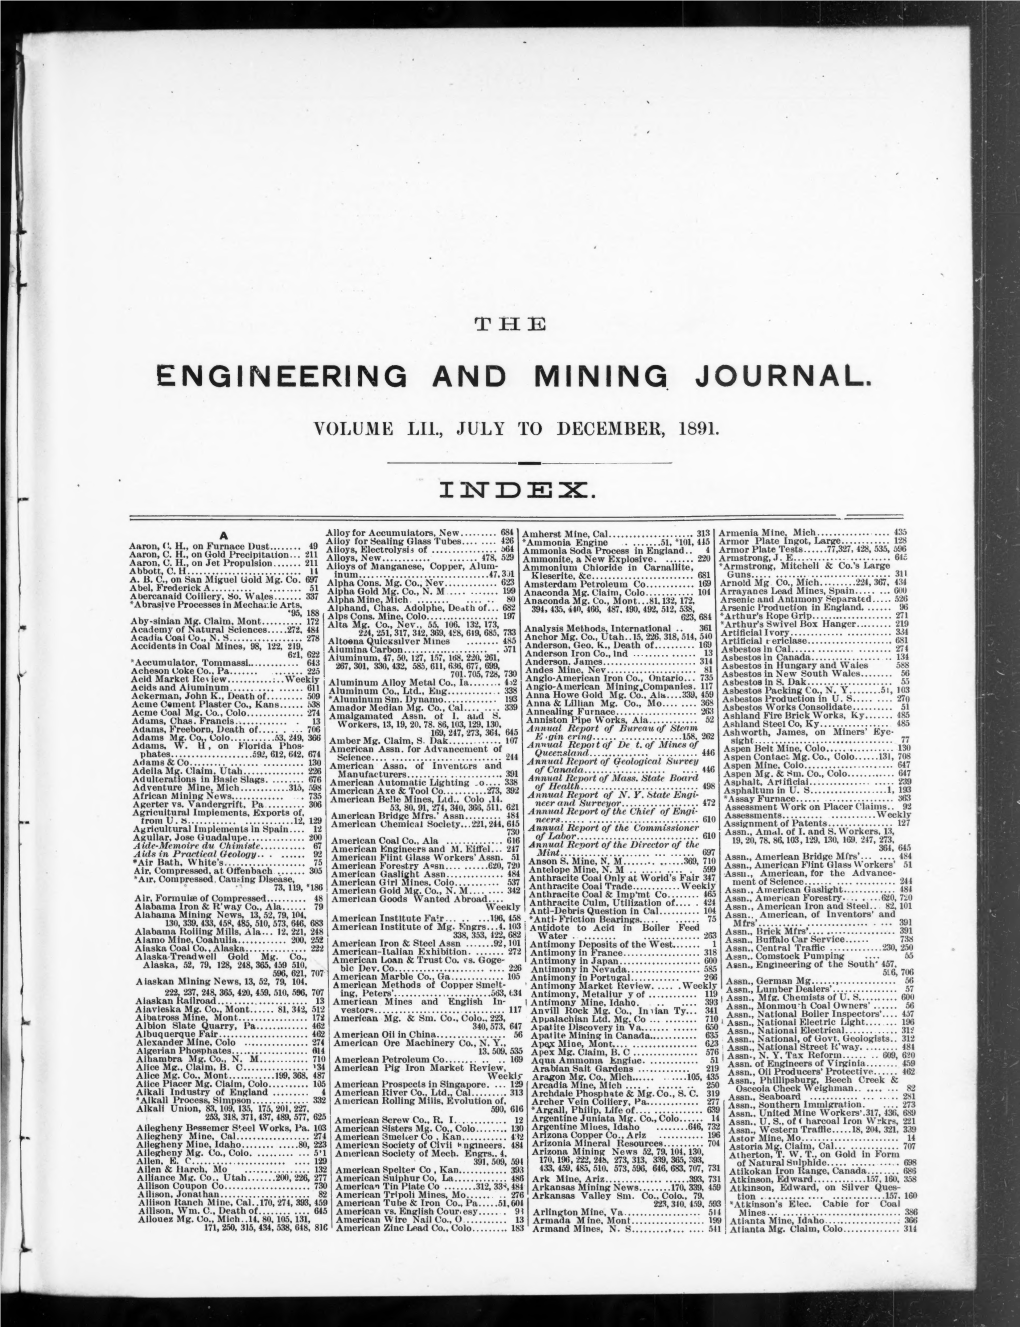 The Engineering and Mining Journal July